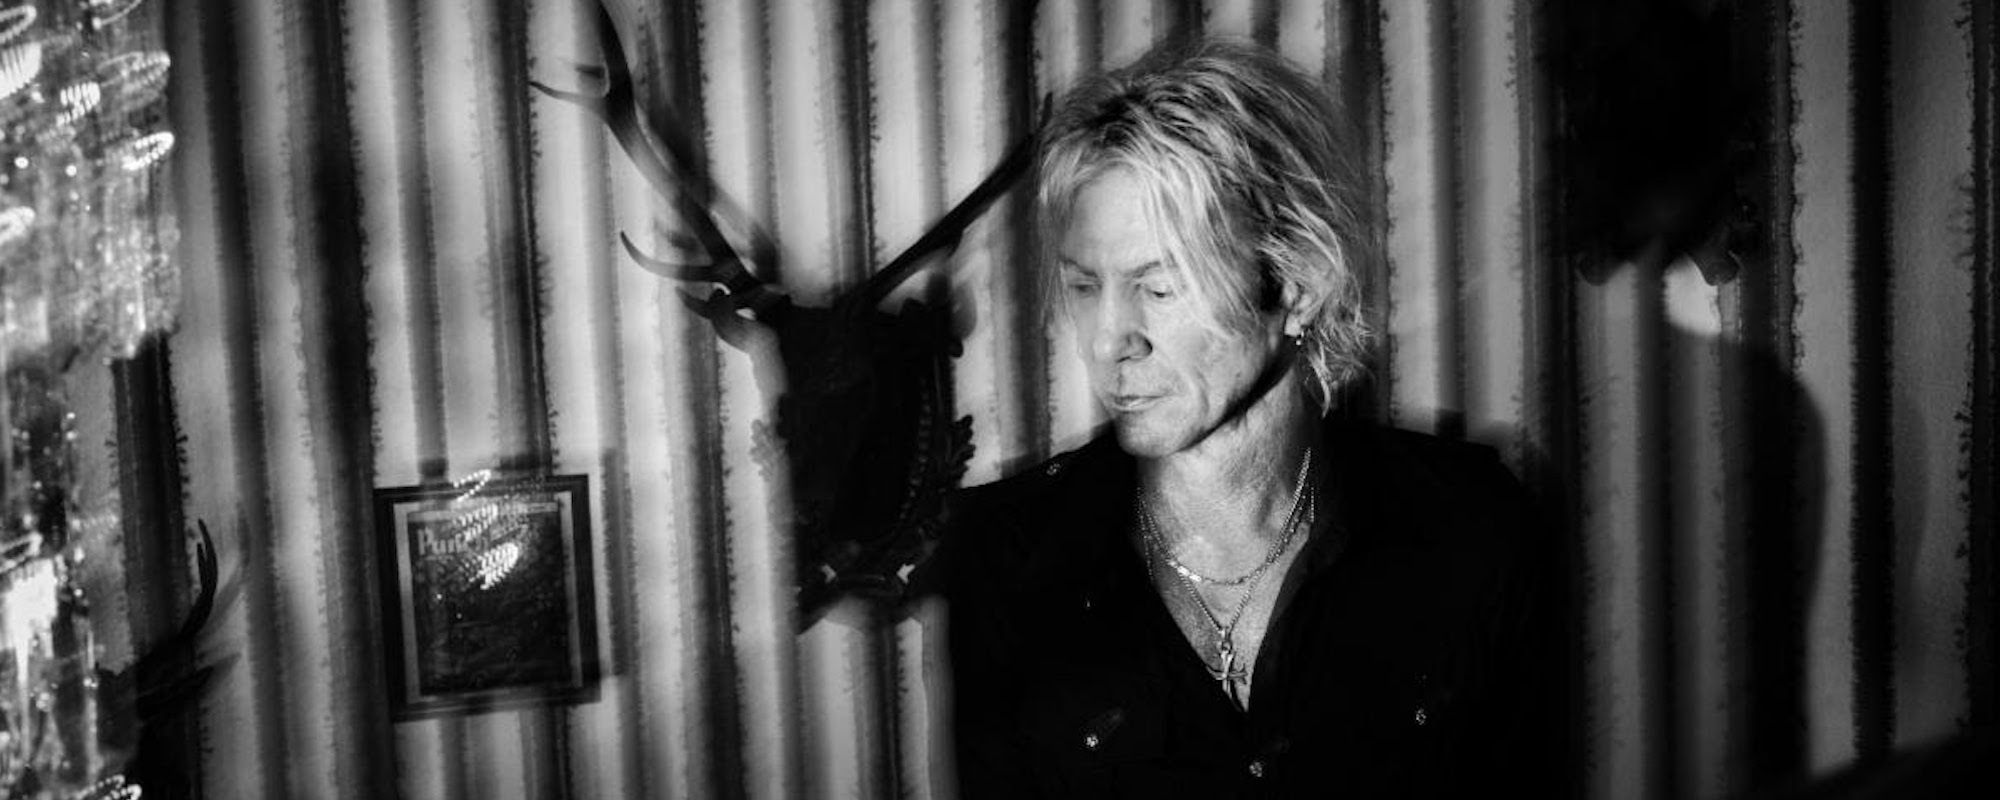 Duff McKagan Shares Personal Struggles with Mental Health on “This Is the Song”